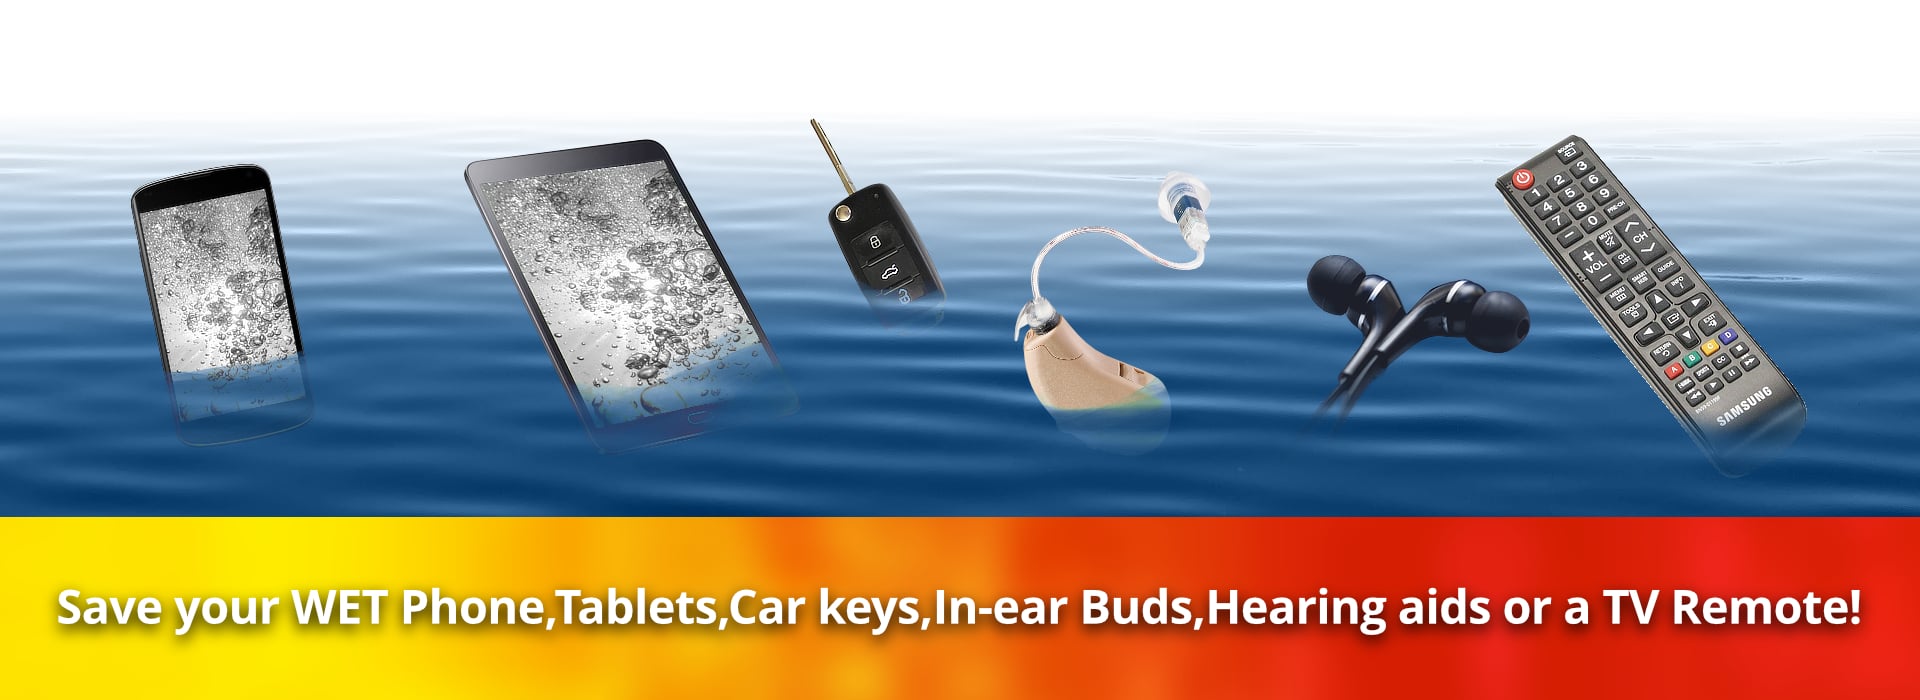 Save your wet phone, tablets, car keys, in-ear buds, hearing aids or a TV Remote!